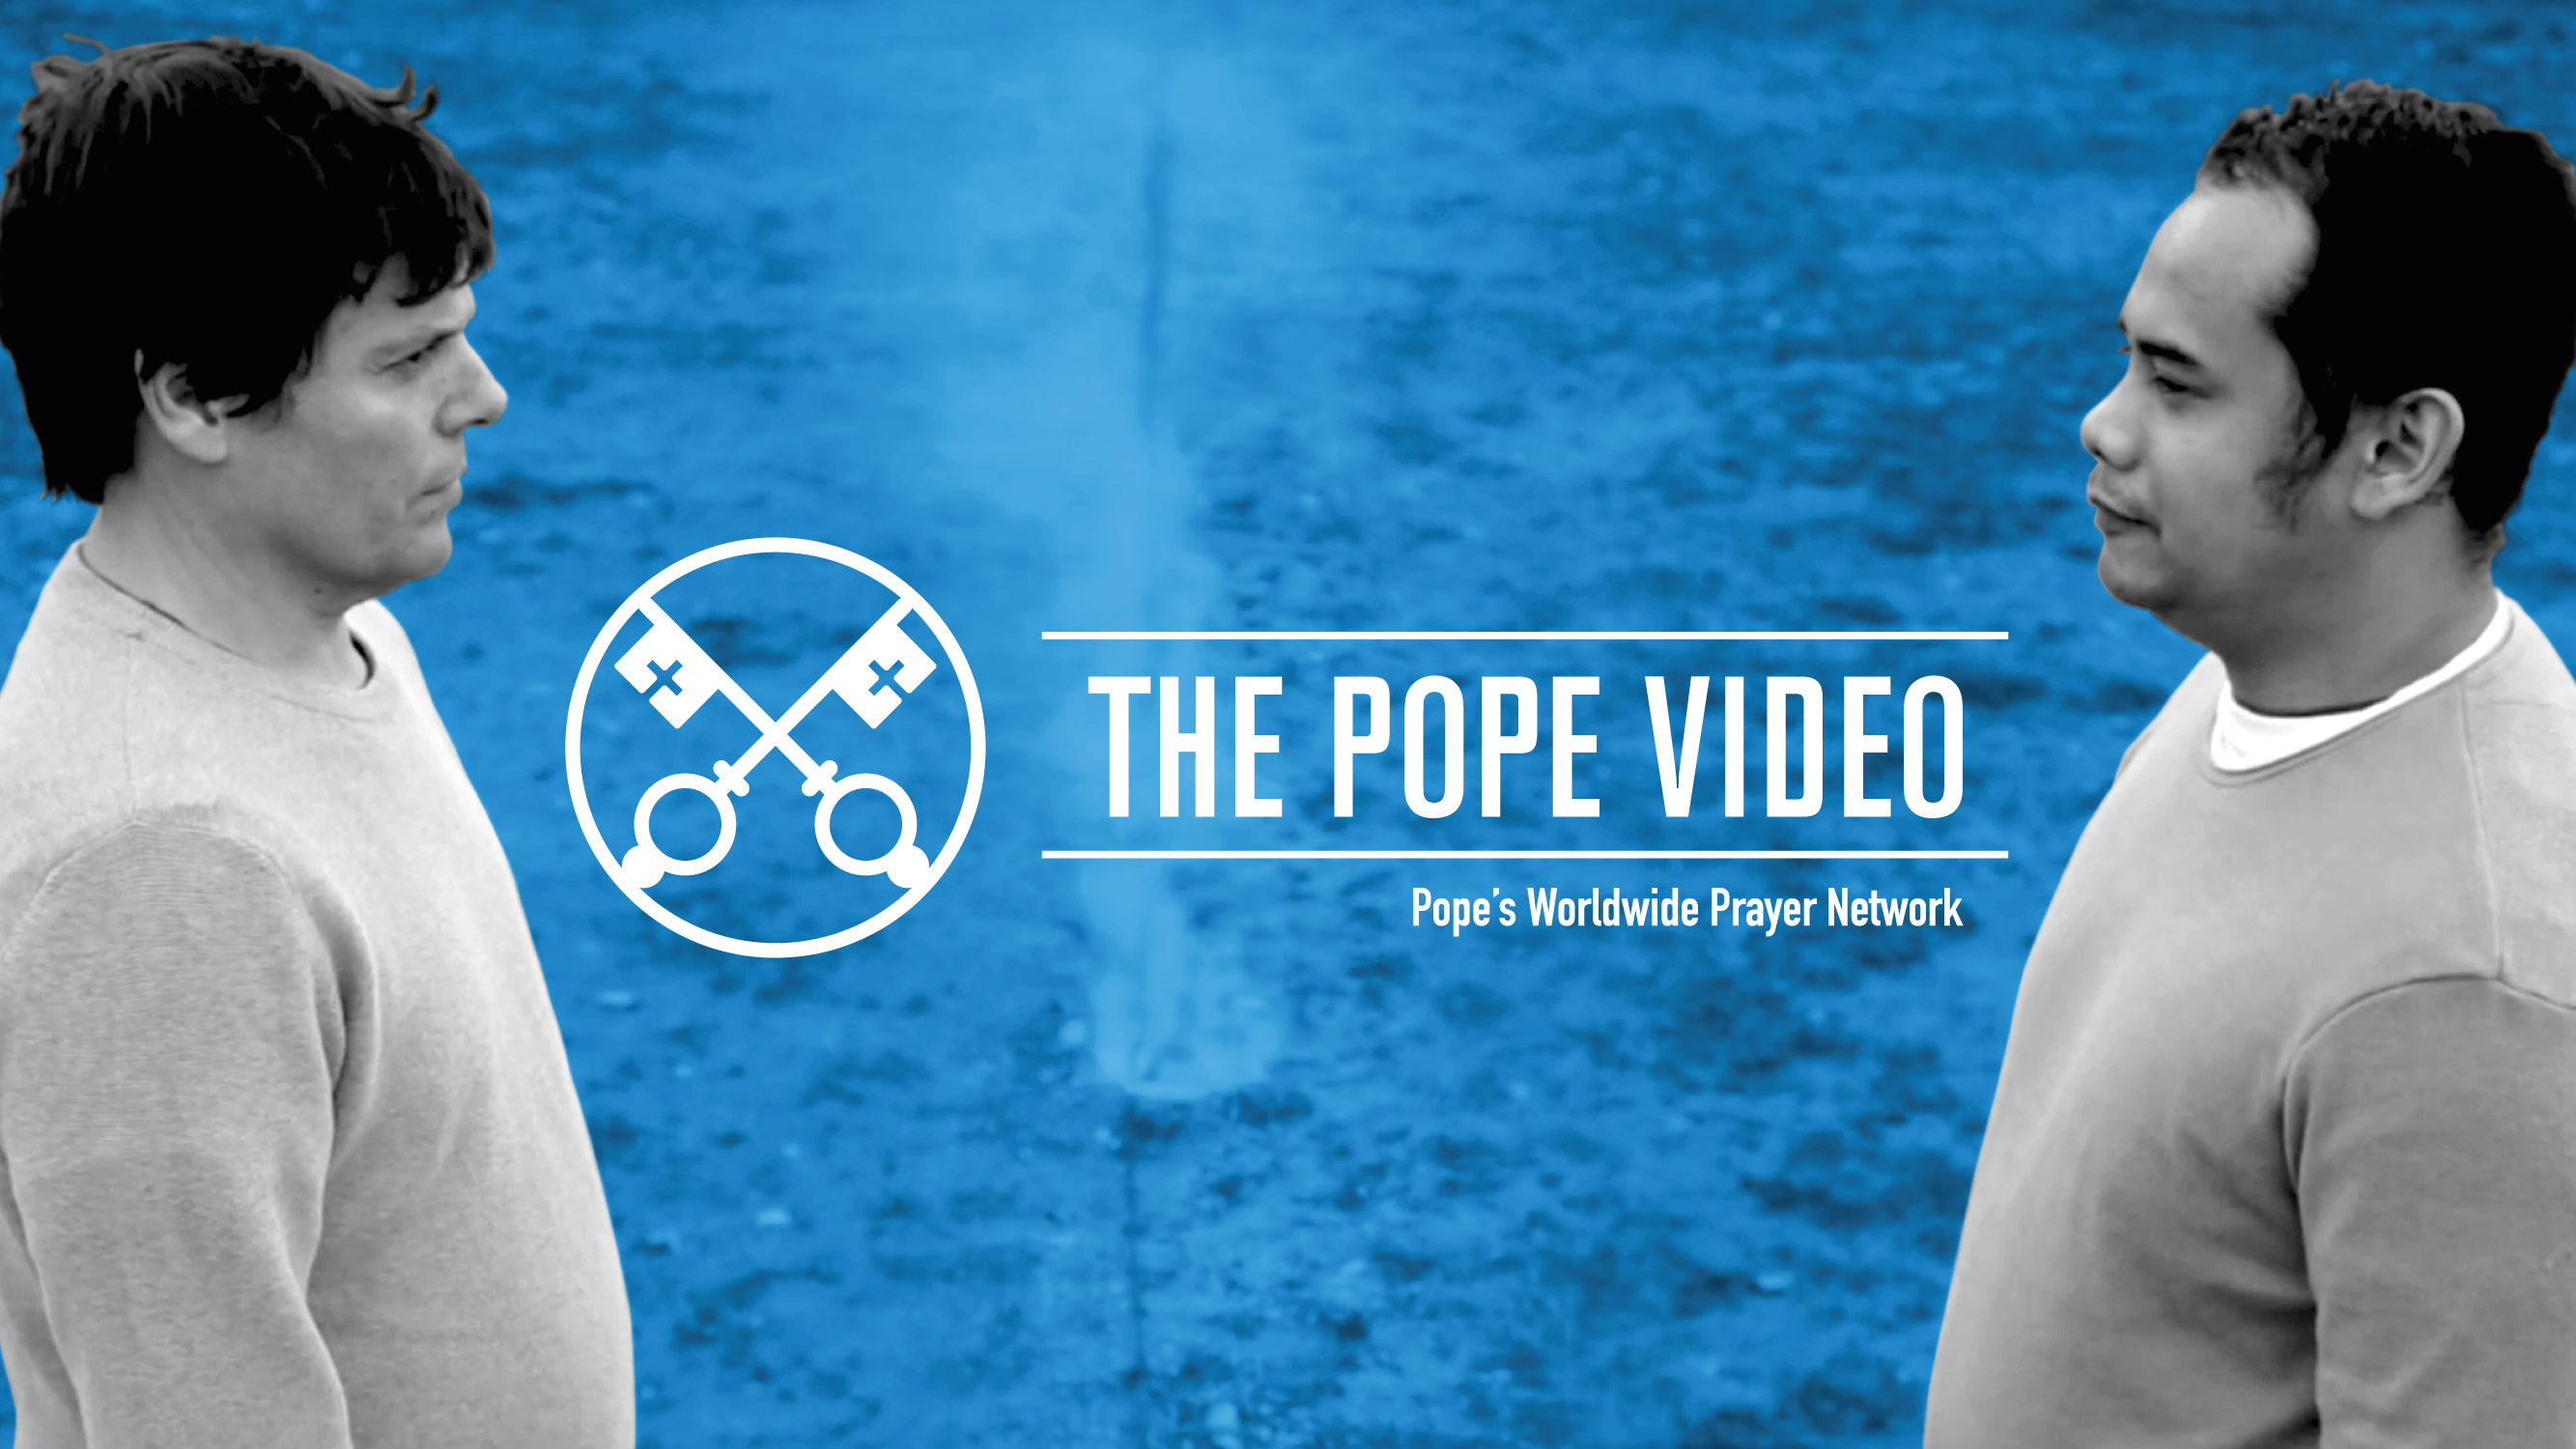 The Pope Video January 2020 (Official Image)